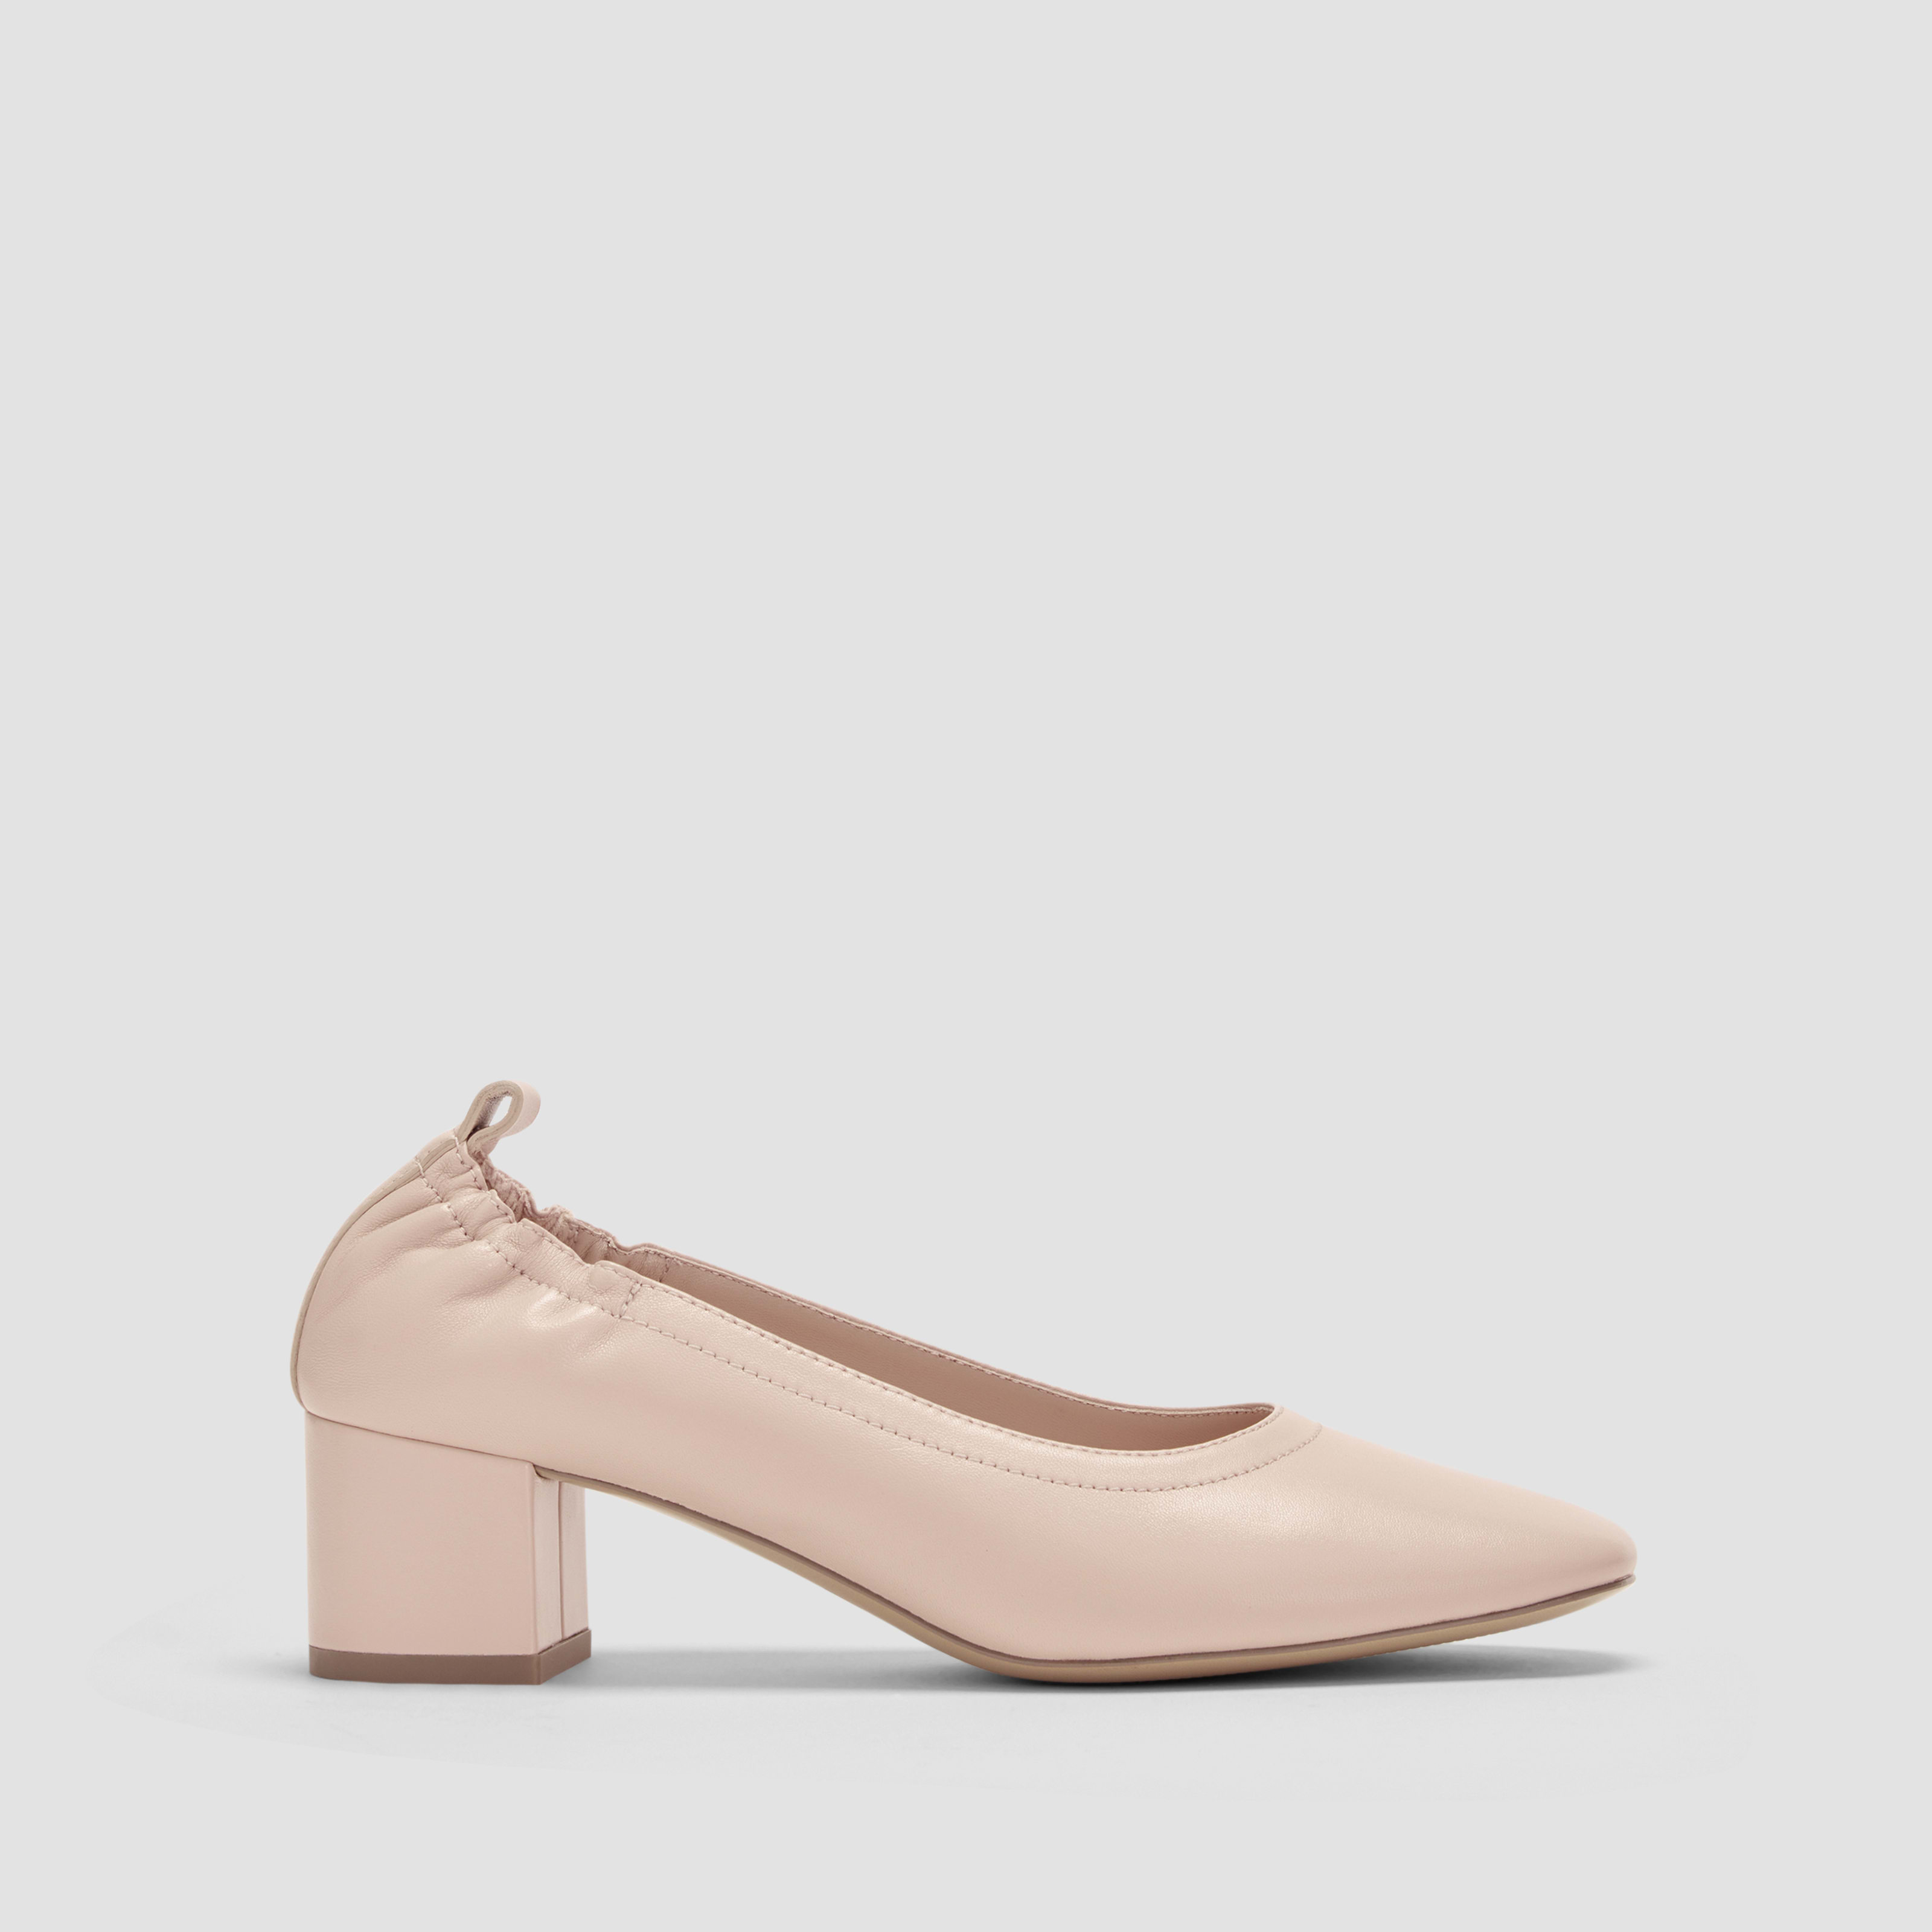 pump heel by everlane in pale pink, size 5